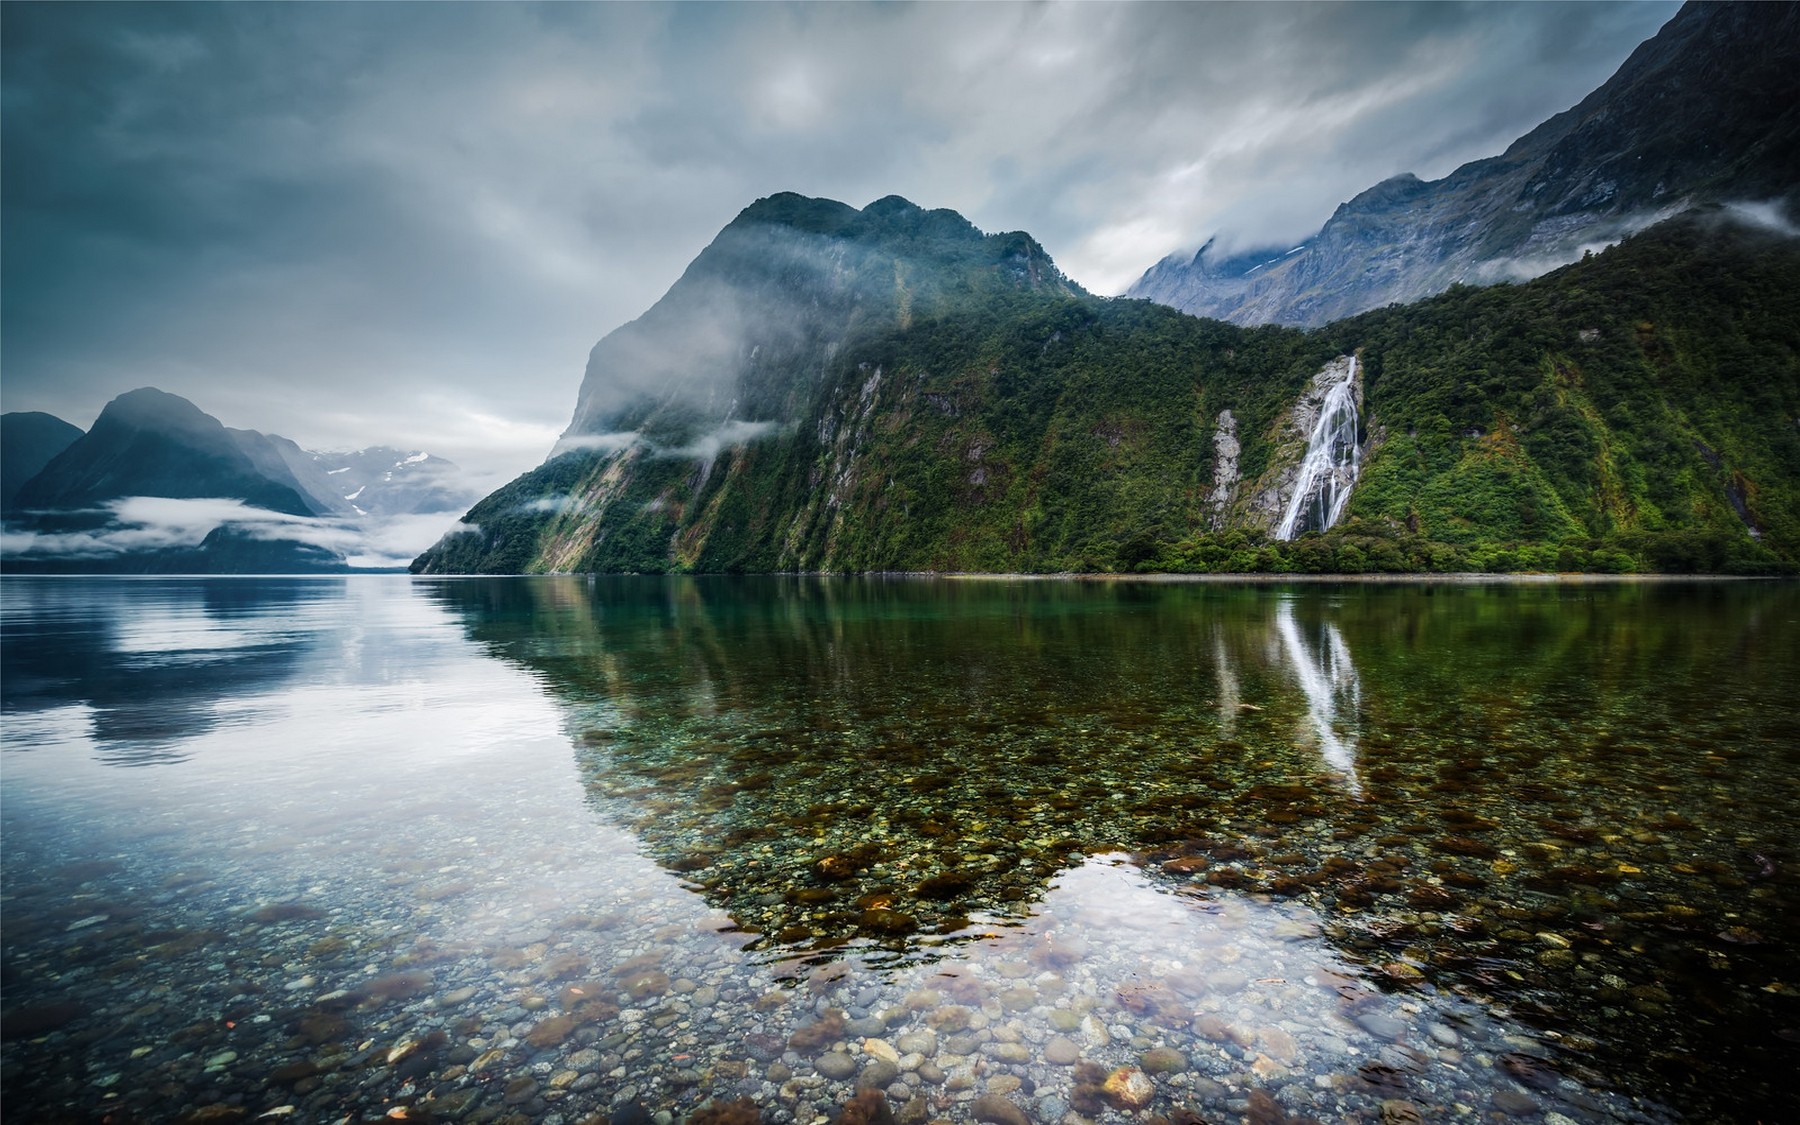 General 1800x1125 nature landscape New Zealand lake mountains mist morning water clouds reflection grass clear water